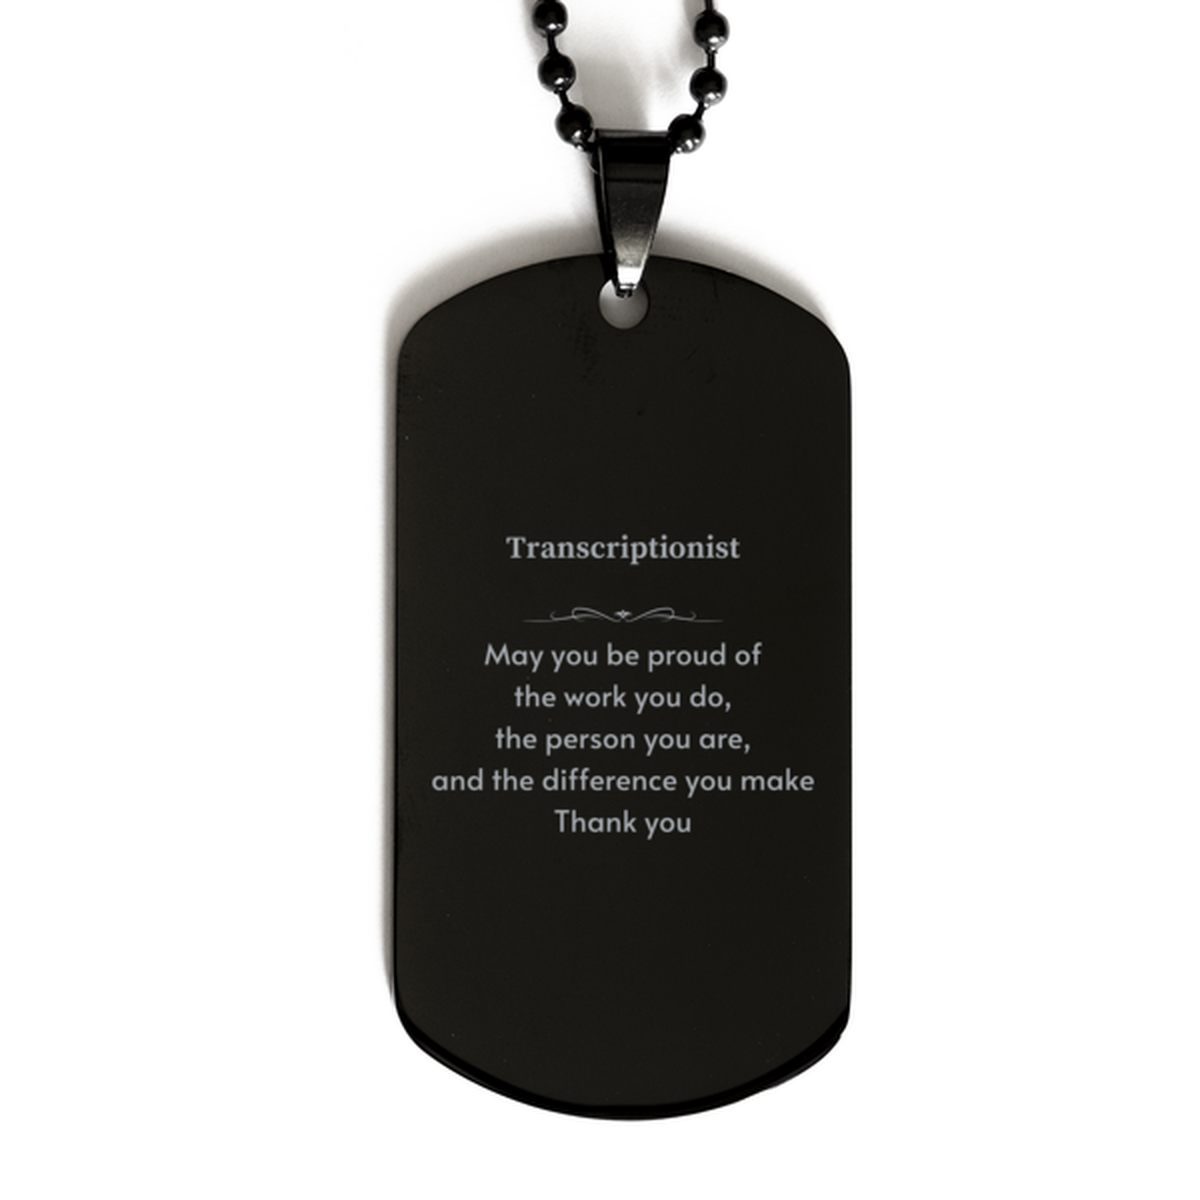 Heartwarming Black Dog Tag Retirement Coworkers Gifts for Transcriptionist, Transcriptionist May You be proud of the work you do, the person you are Gifts for Boss Men Women Friends